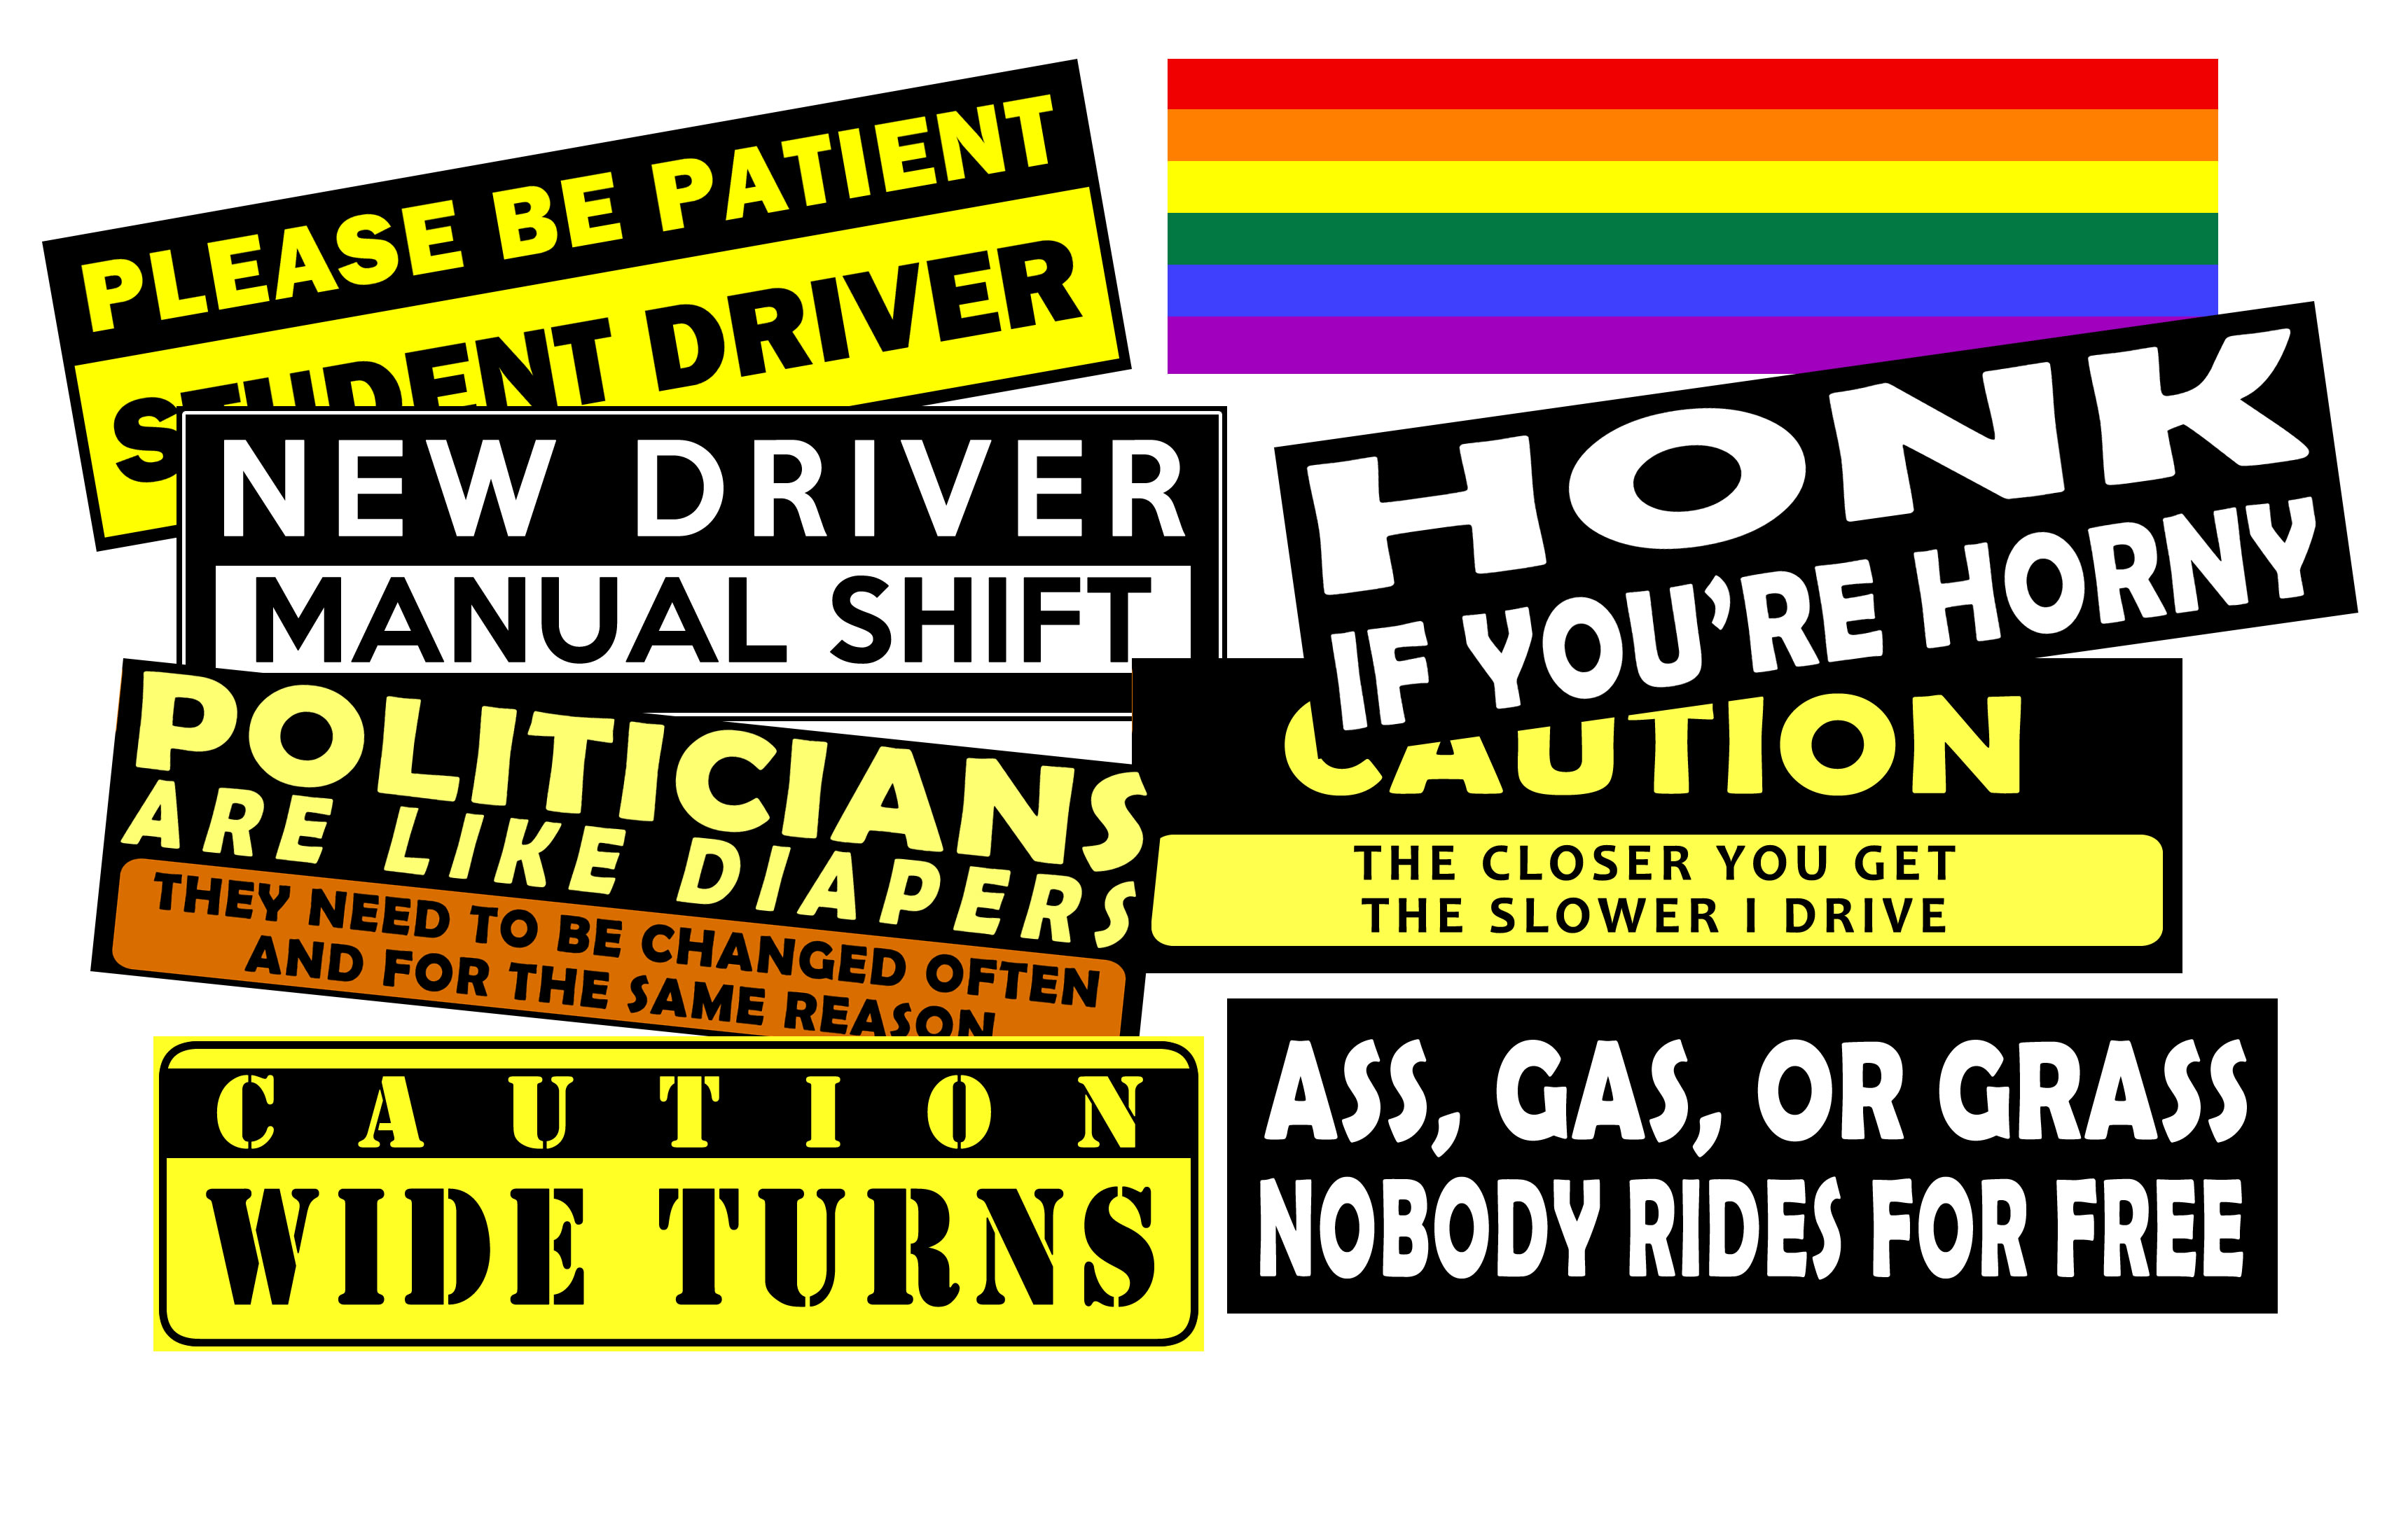 Custom Bumper Stickers, Magnets, Window Cling, Mugs, Key Chains, Lighter Wraps and more